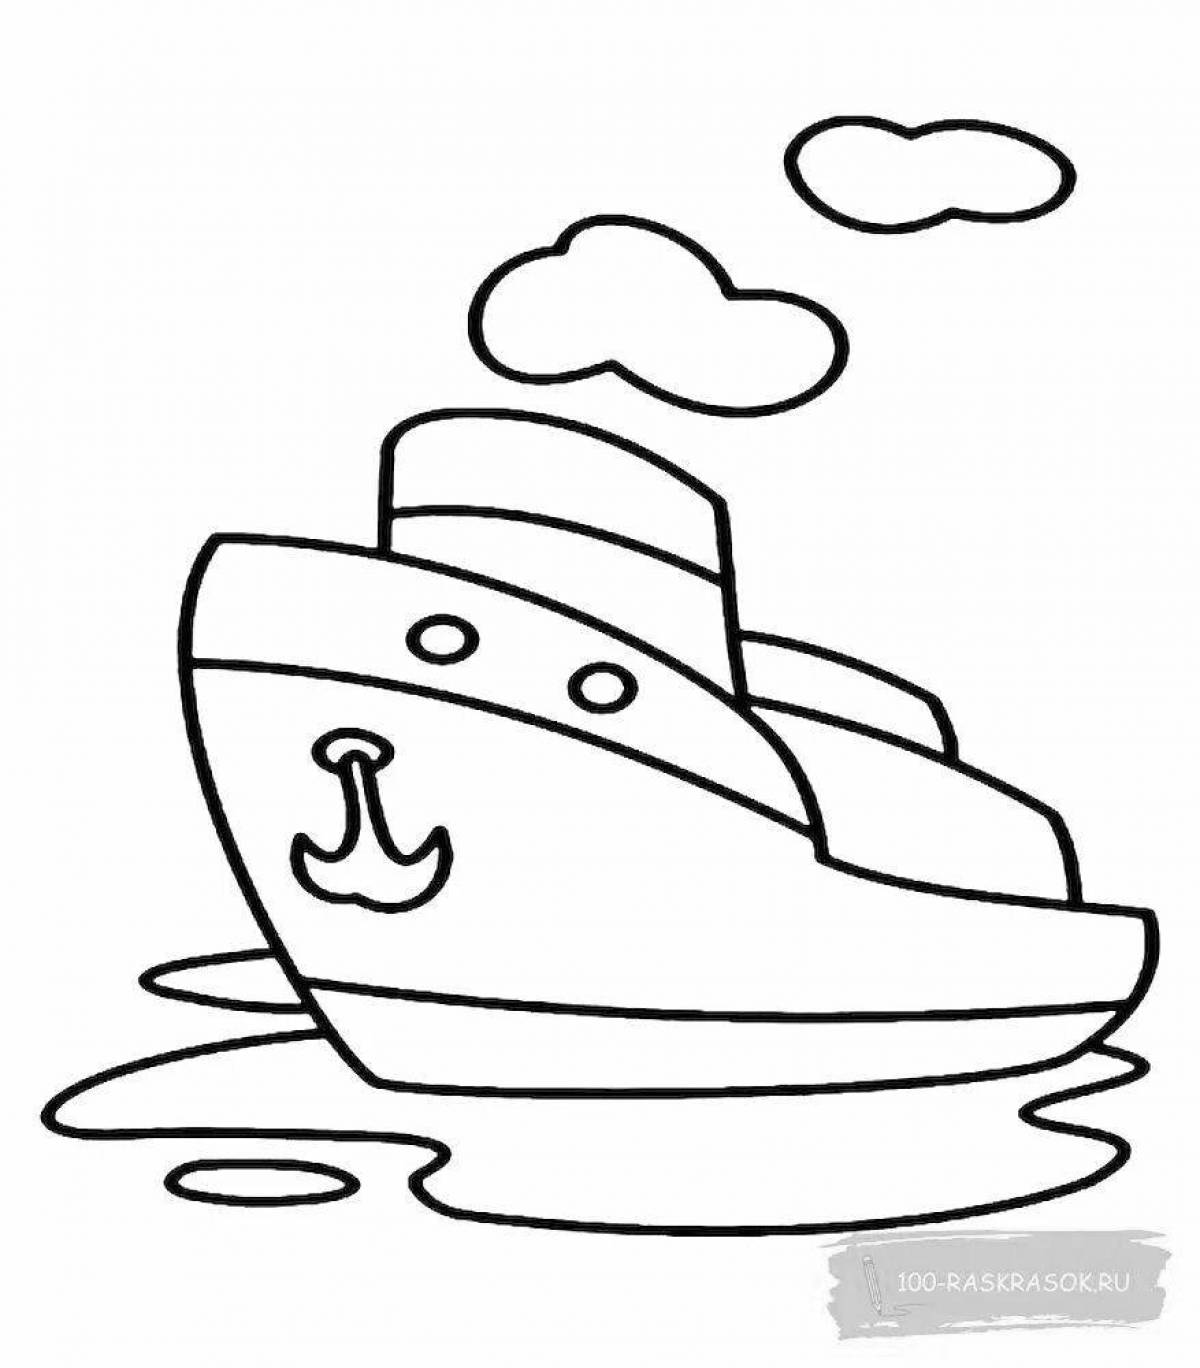 Fun boat coloring for 4-5 year olds